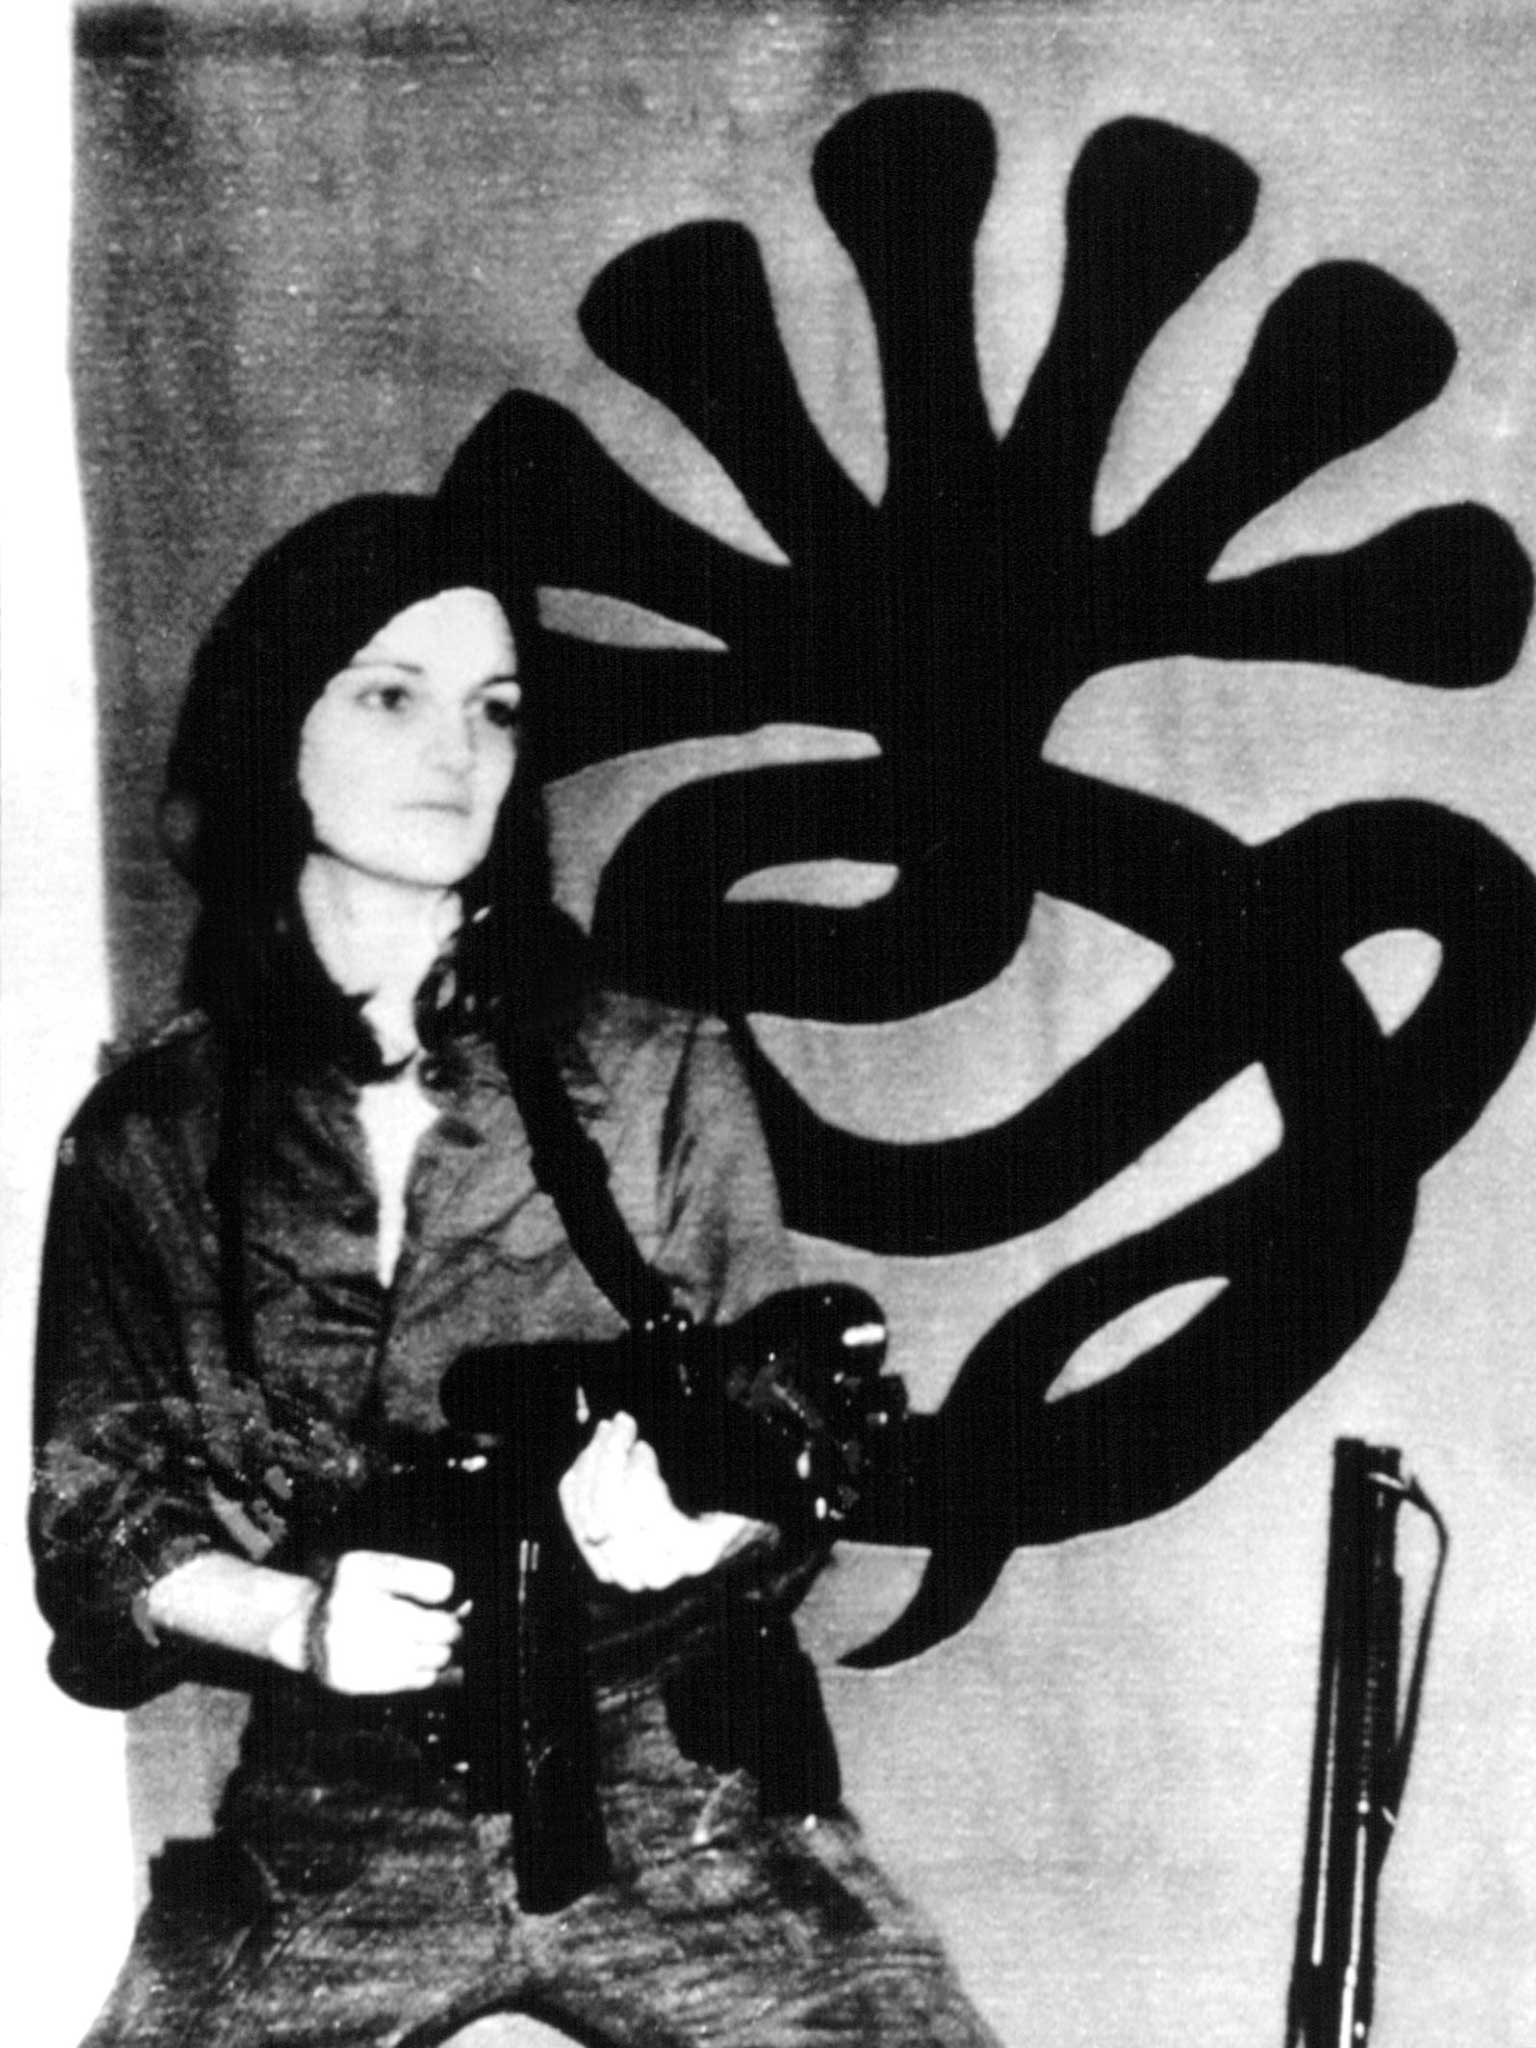 A gun-toting Patricia Hearst poses in front of the SLA emblem